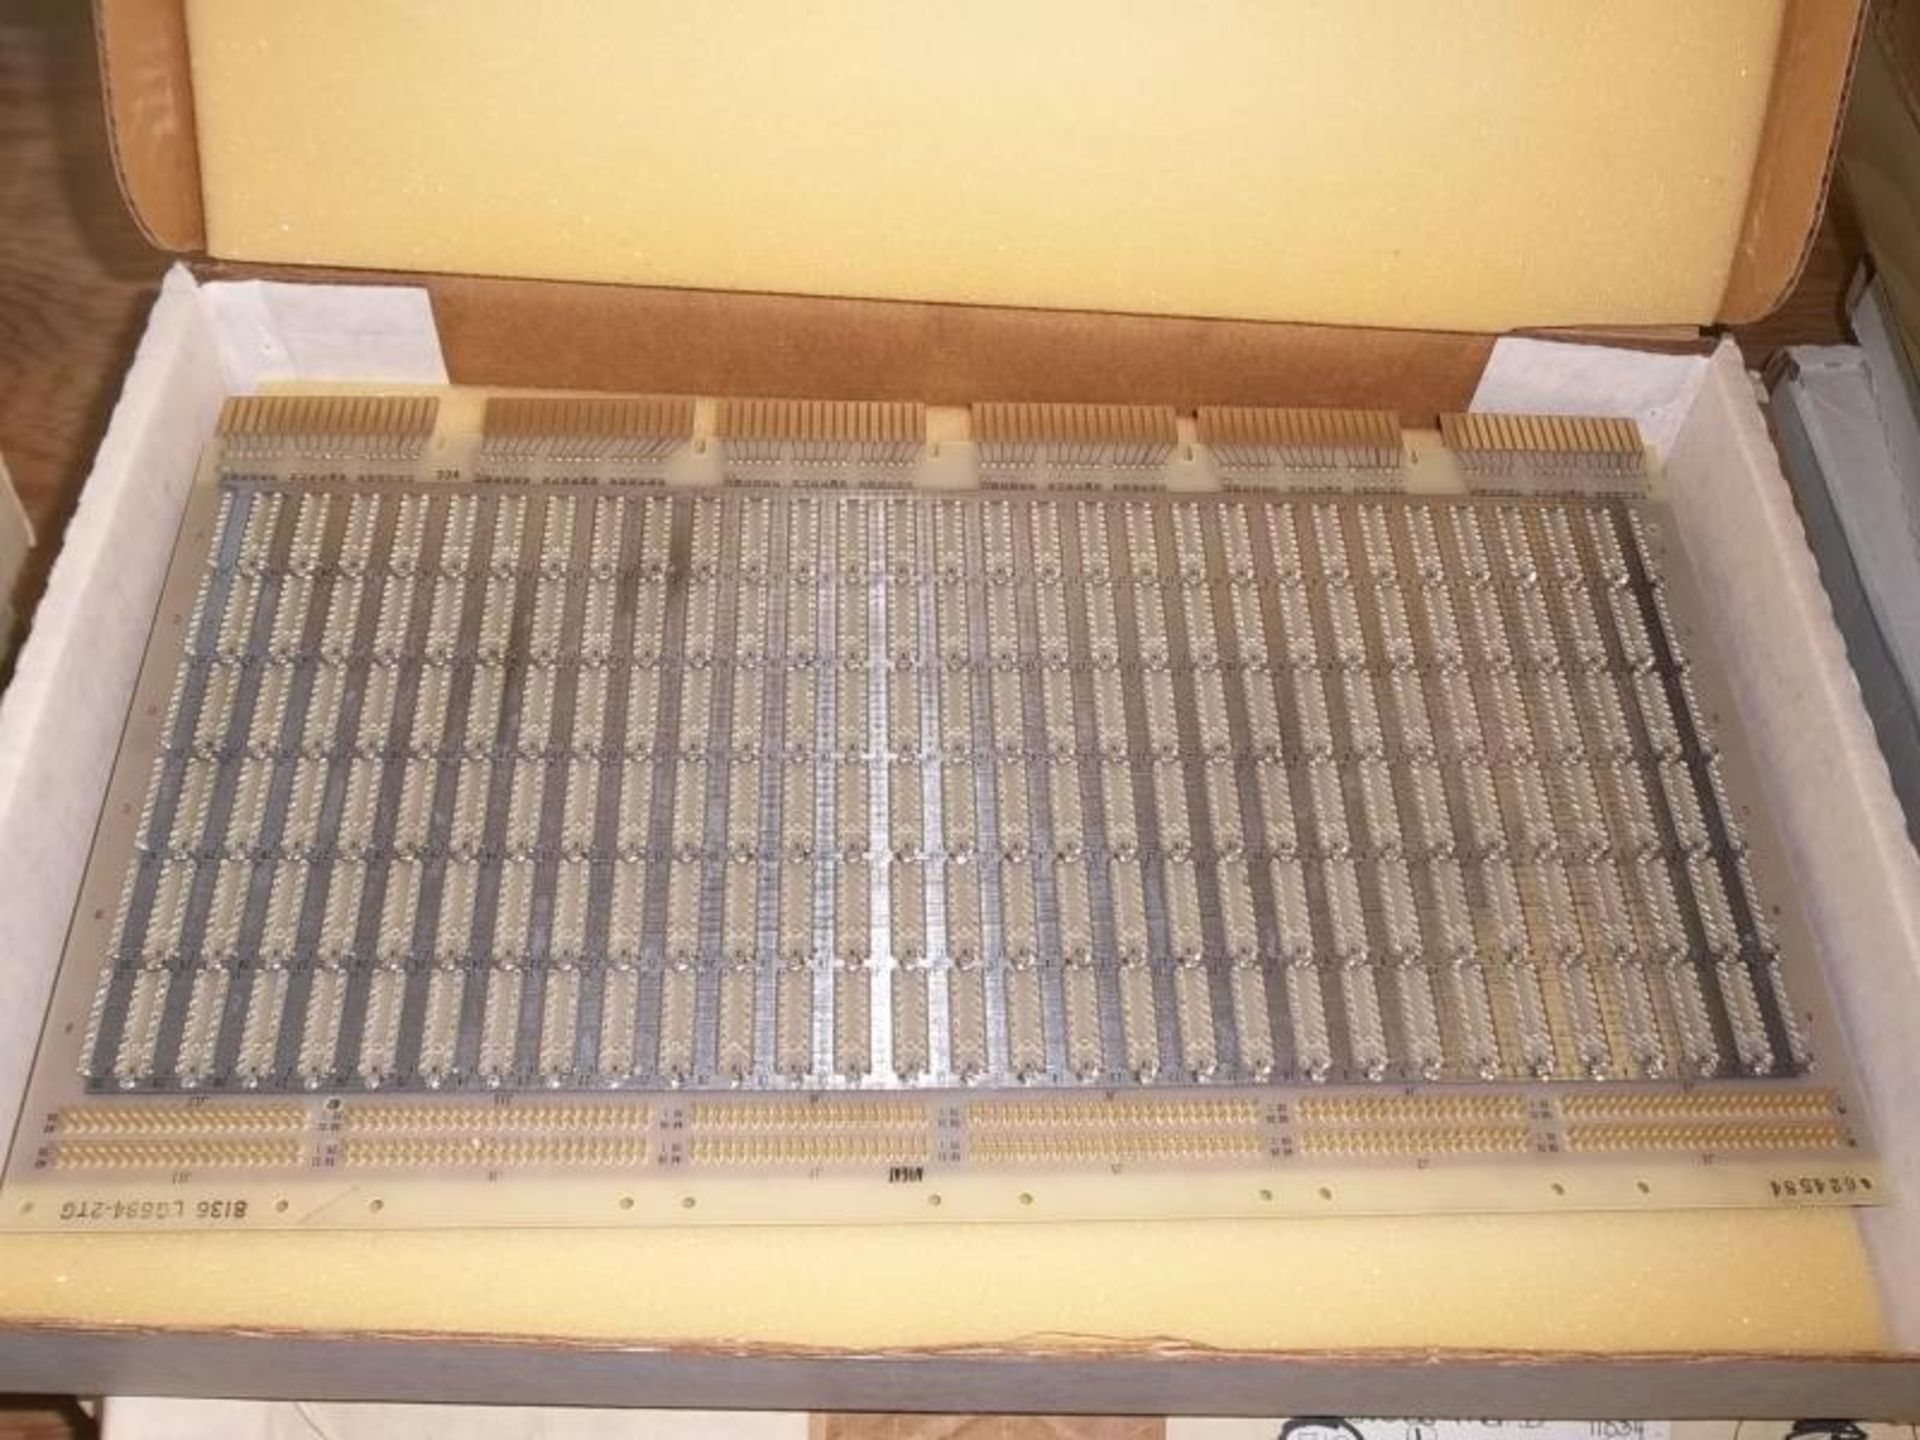 Lot - 30 plus computer interface boards, wire wrap boards, extender cards, various sizes, in boxes - Image 6 of 7